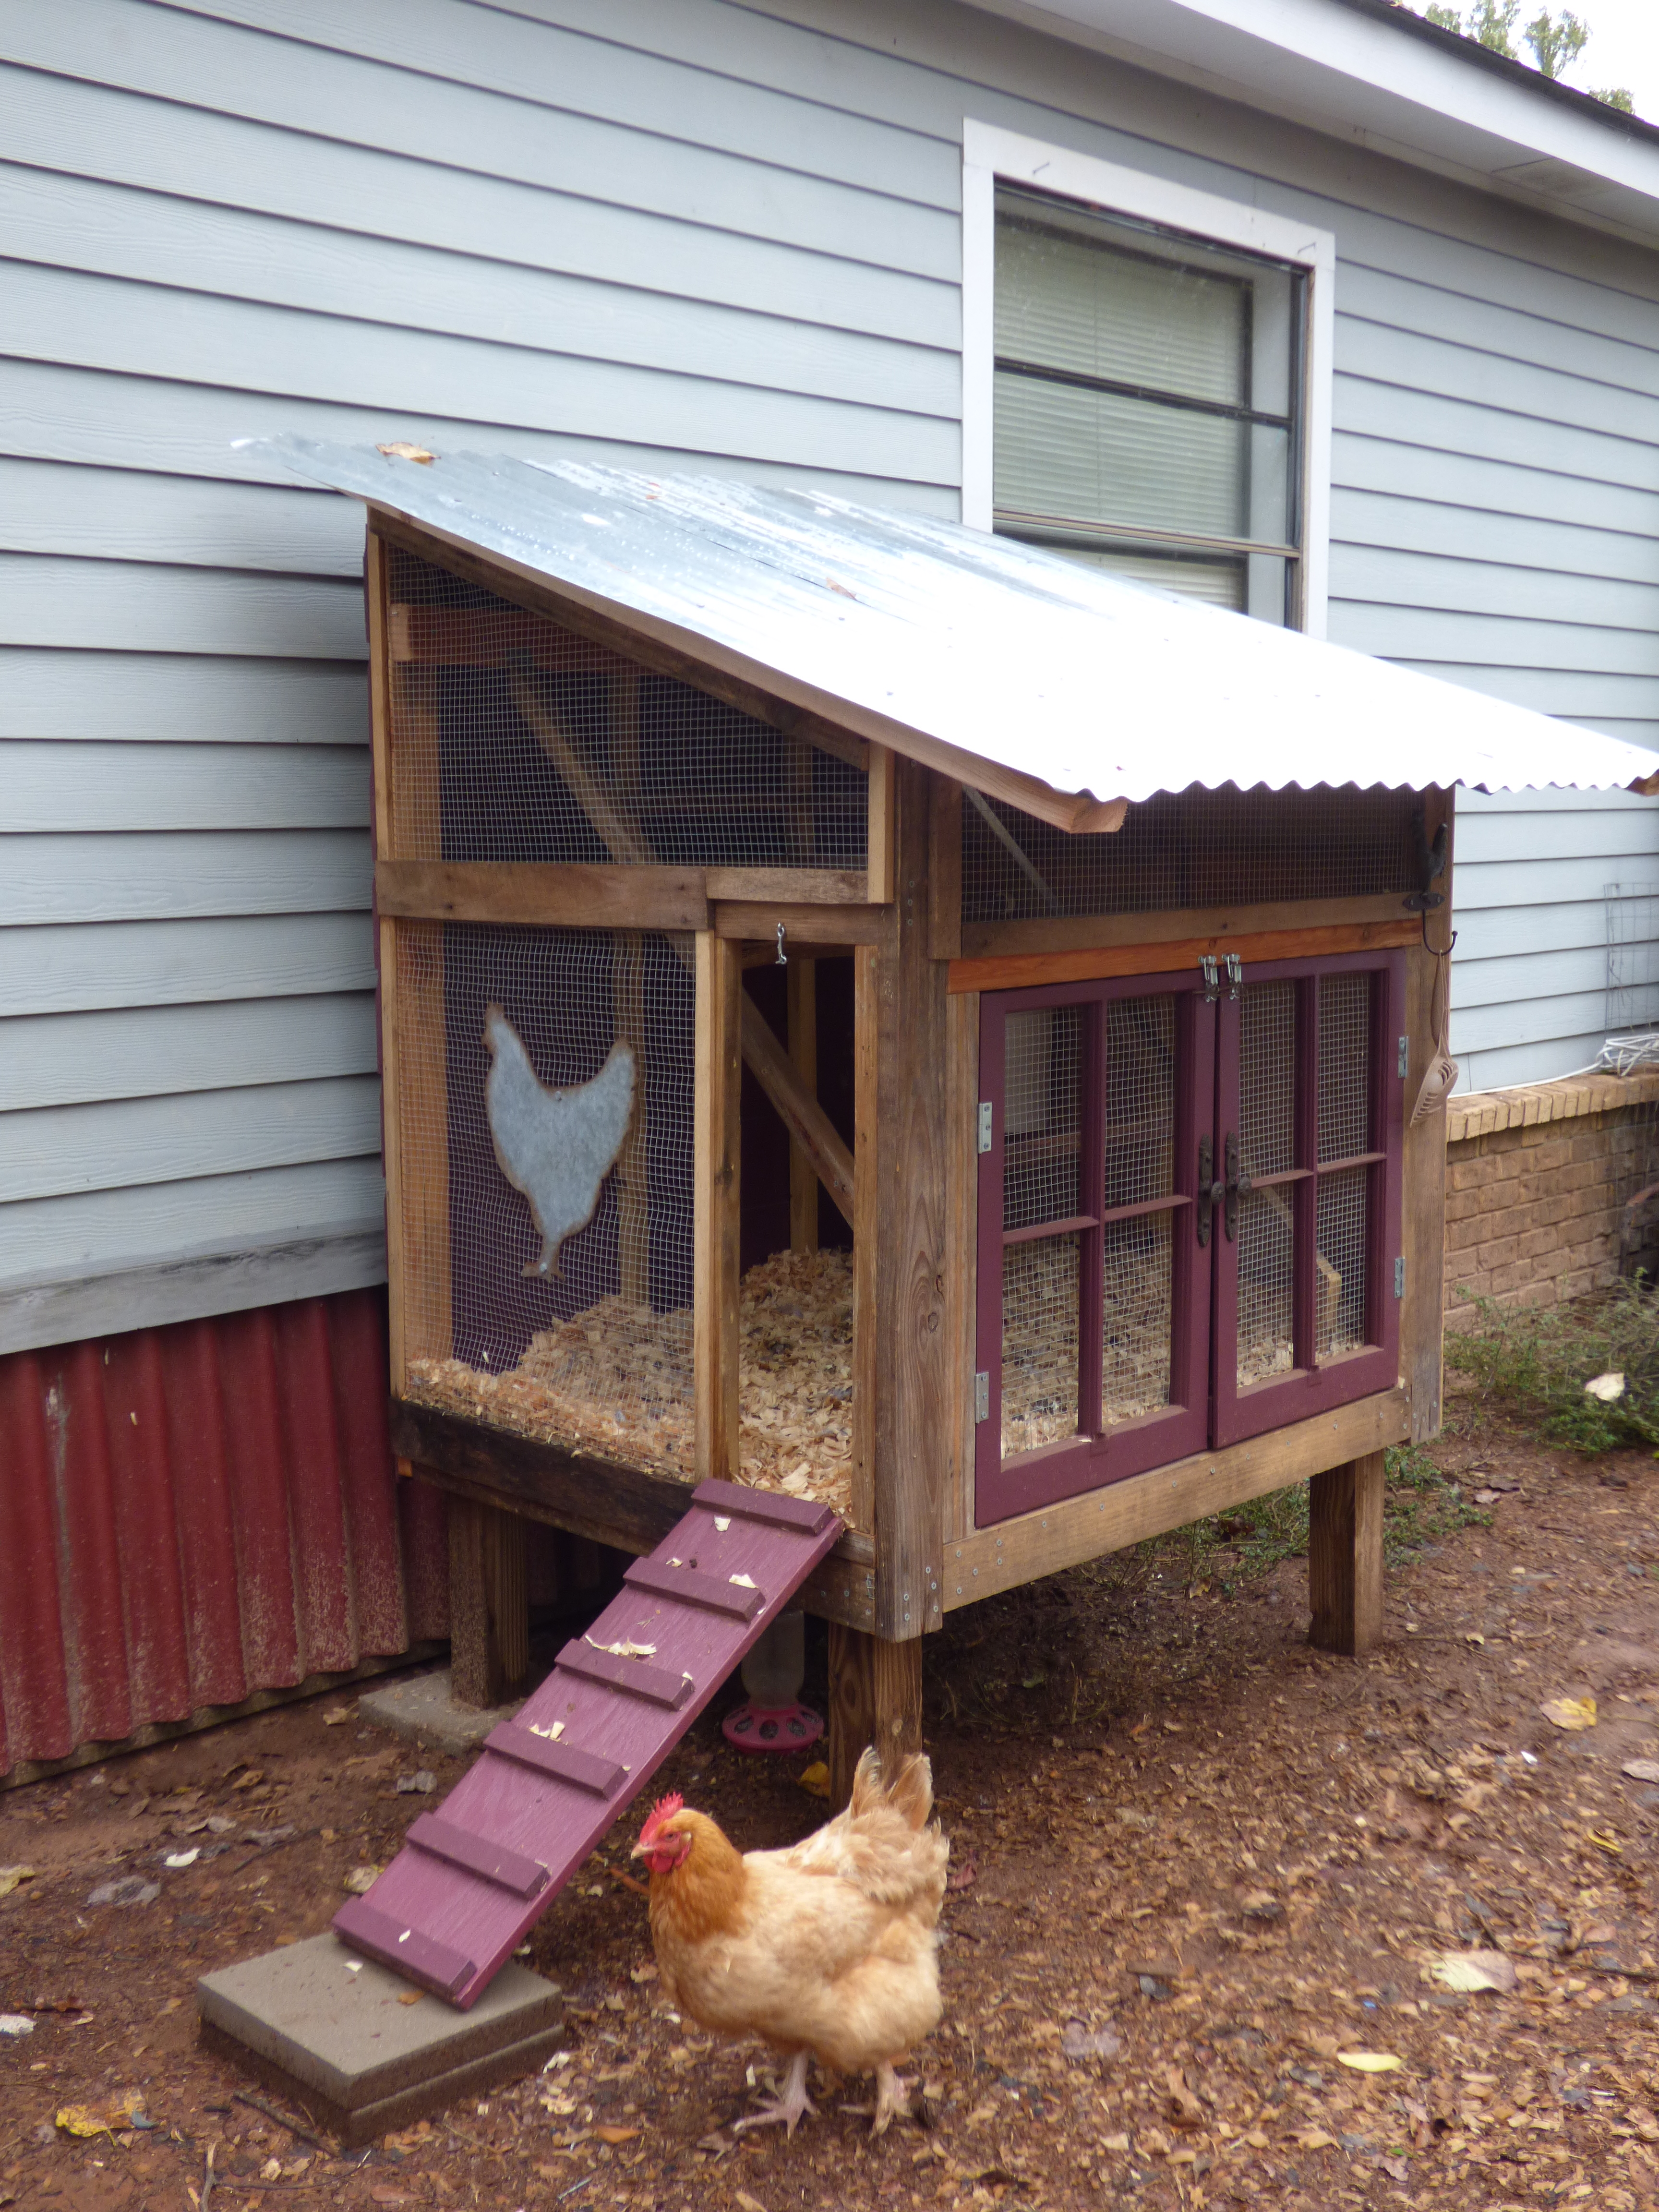 Cool Coops! - The Rustic / Whimsical Coop | Community Chickens